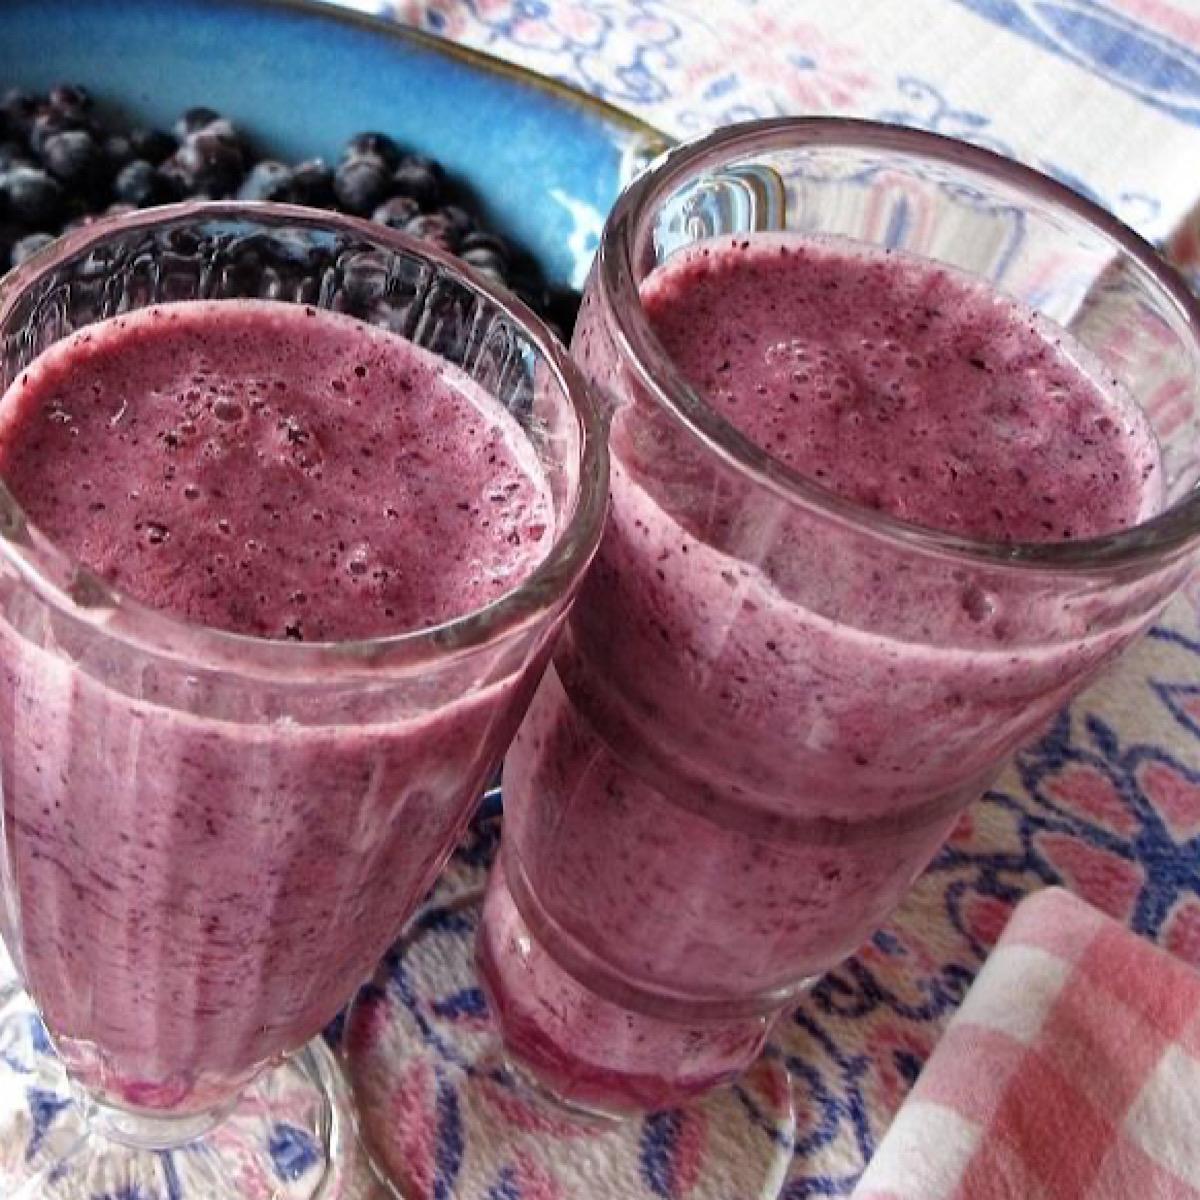 Blueberry protein low carb smoothies